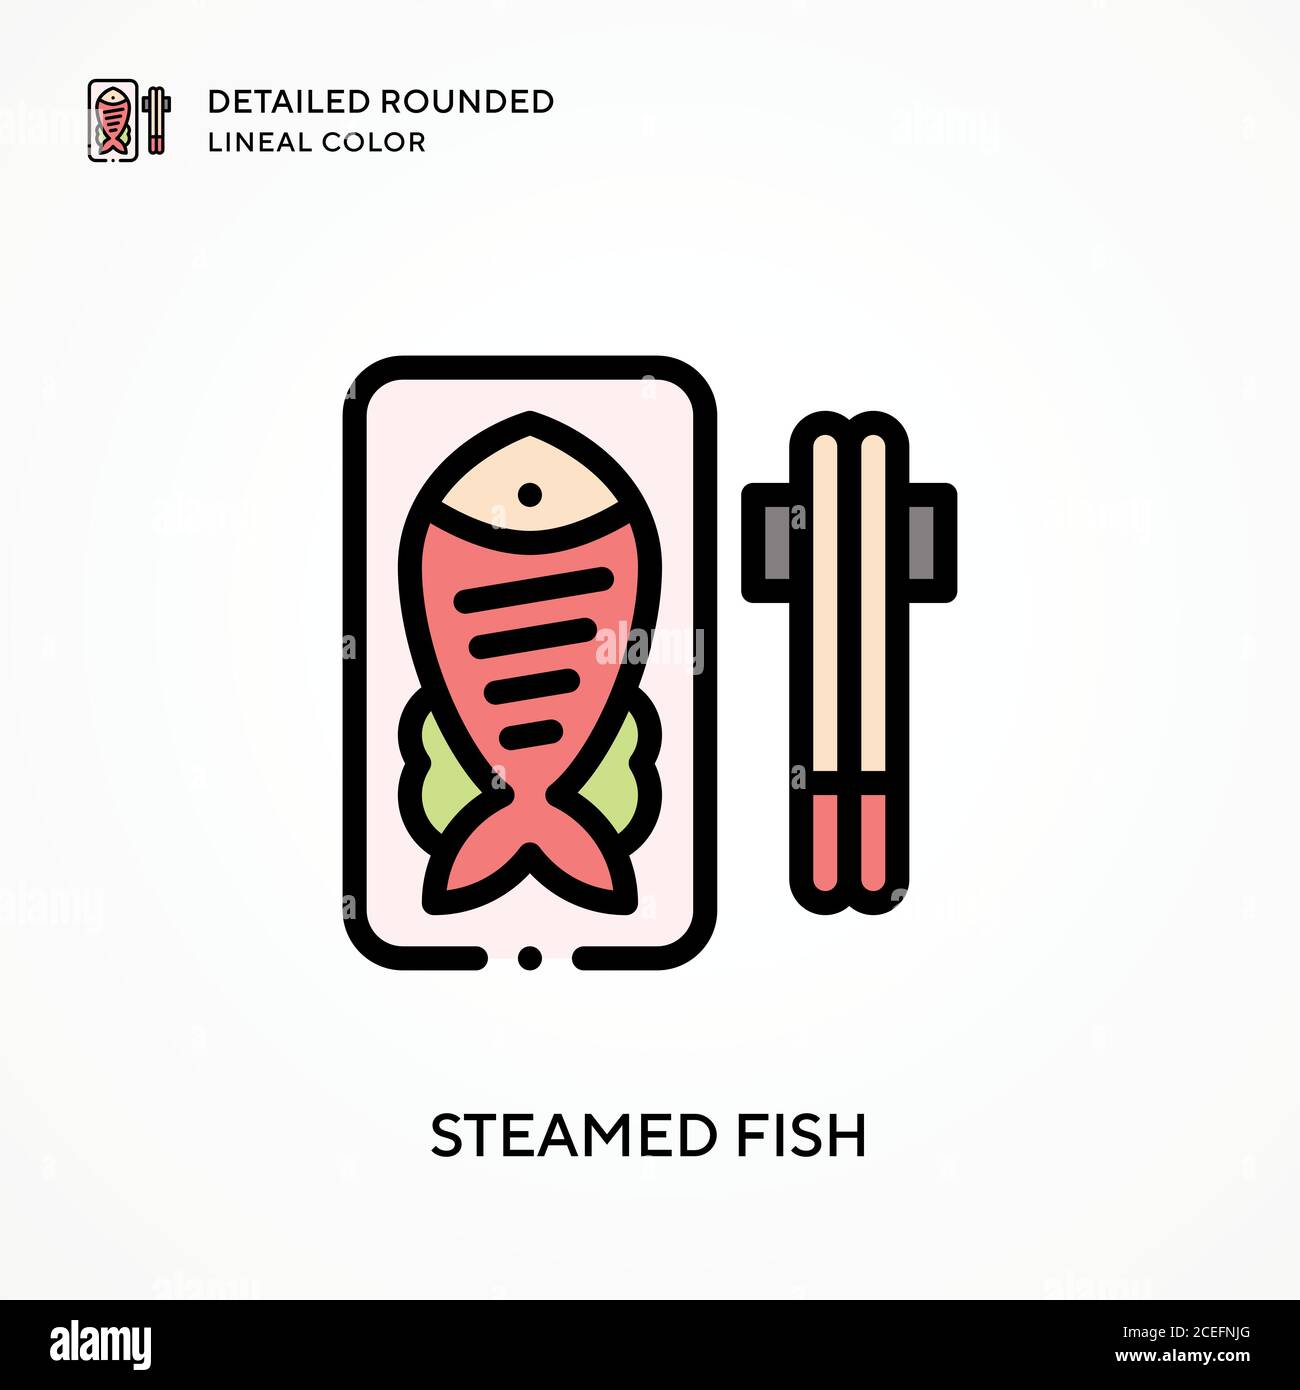 Steamed fish detailed rounded lineal color. Modern vector illustration concepts. Easy to edit and customize. Stock Vector